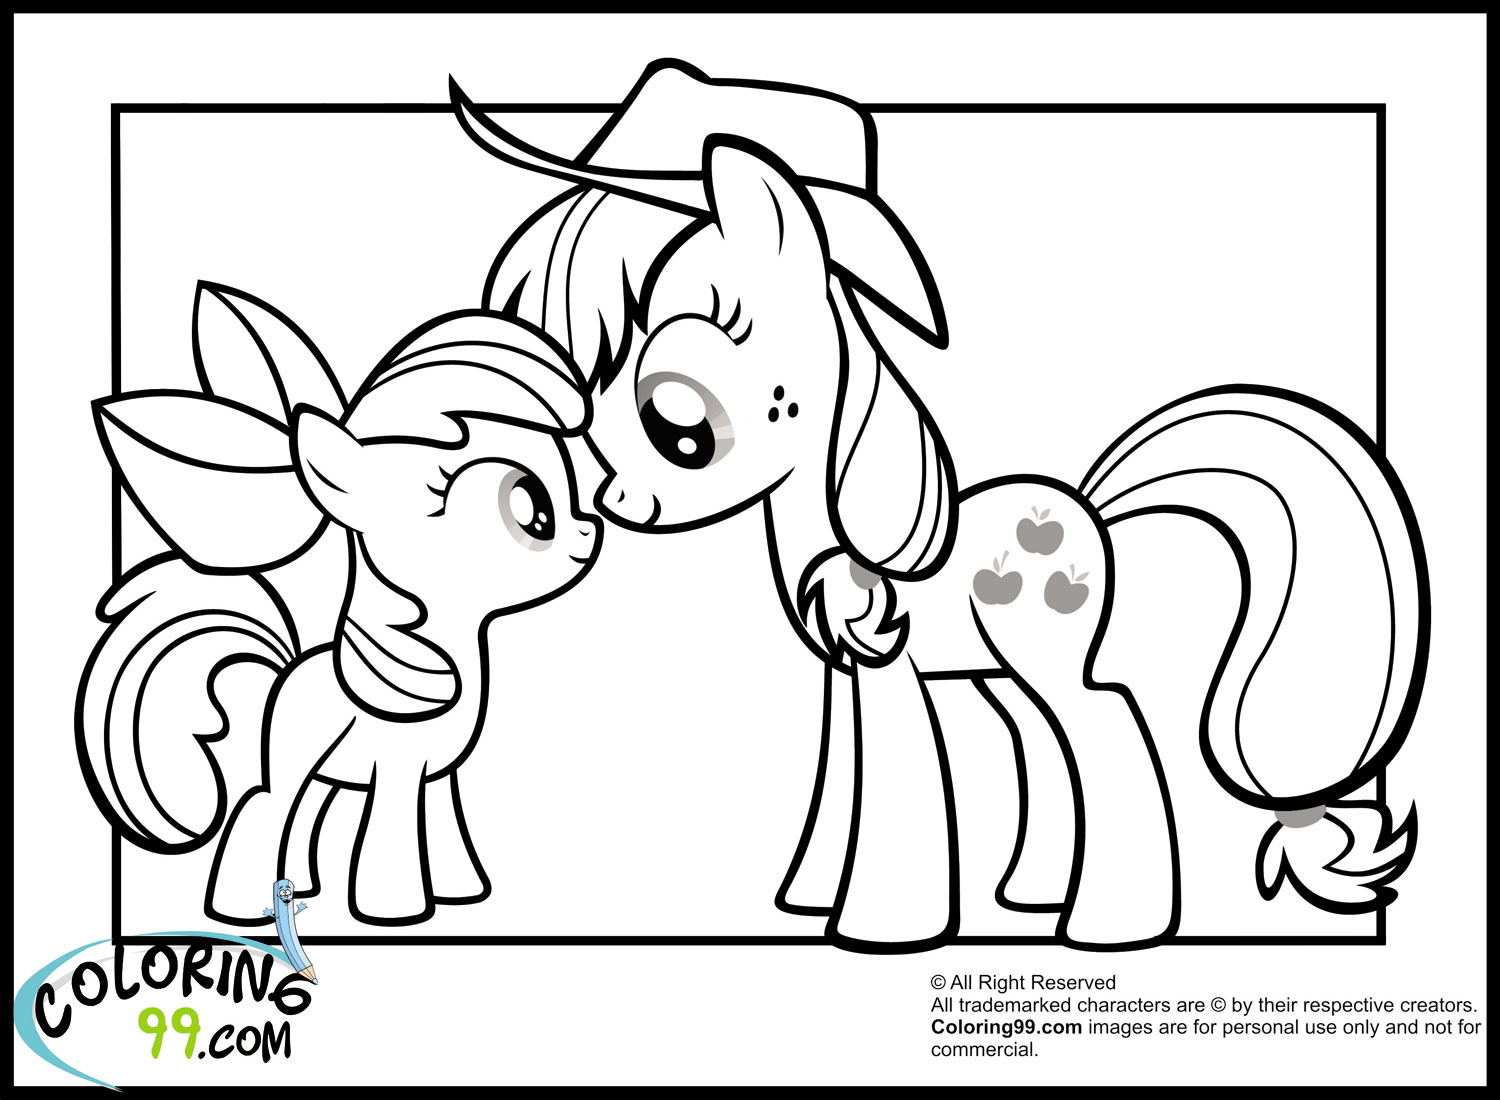 Download My Little Pony Applejack Coloring Pages | Team colors